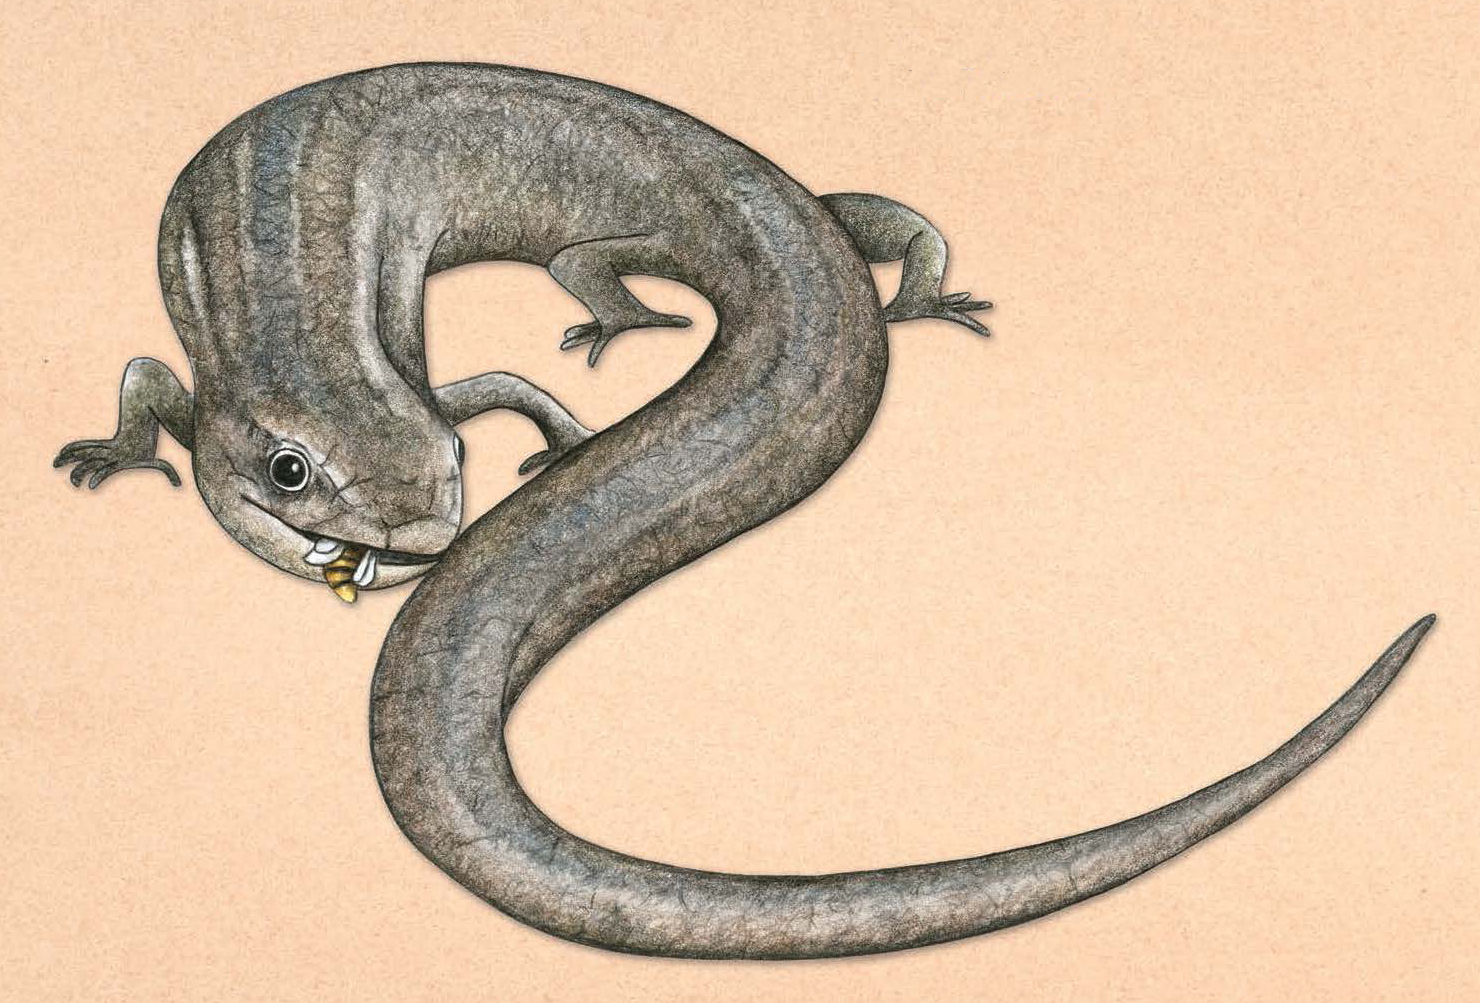 Illustration of a brown lizard eating a wasp.